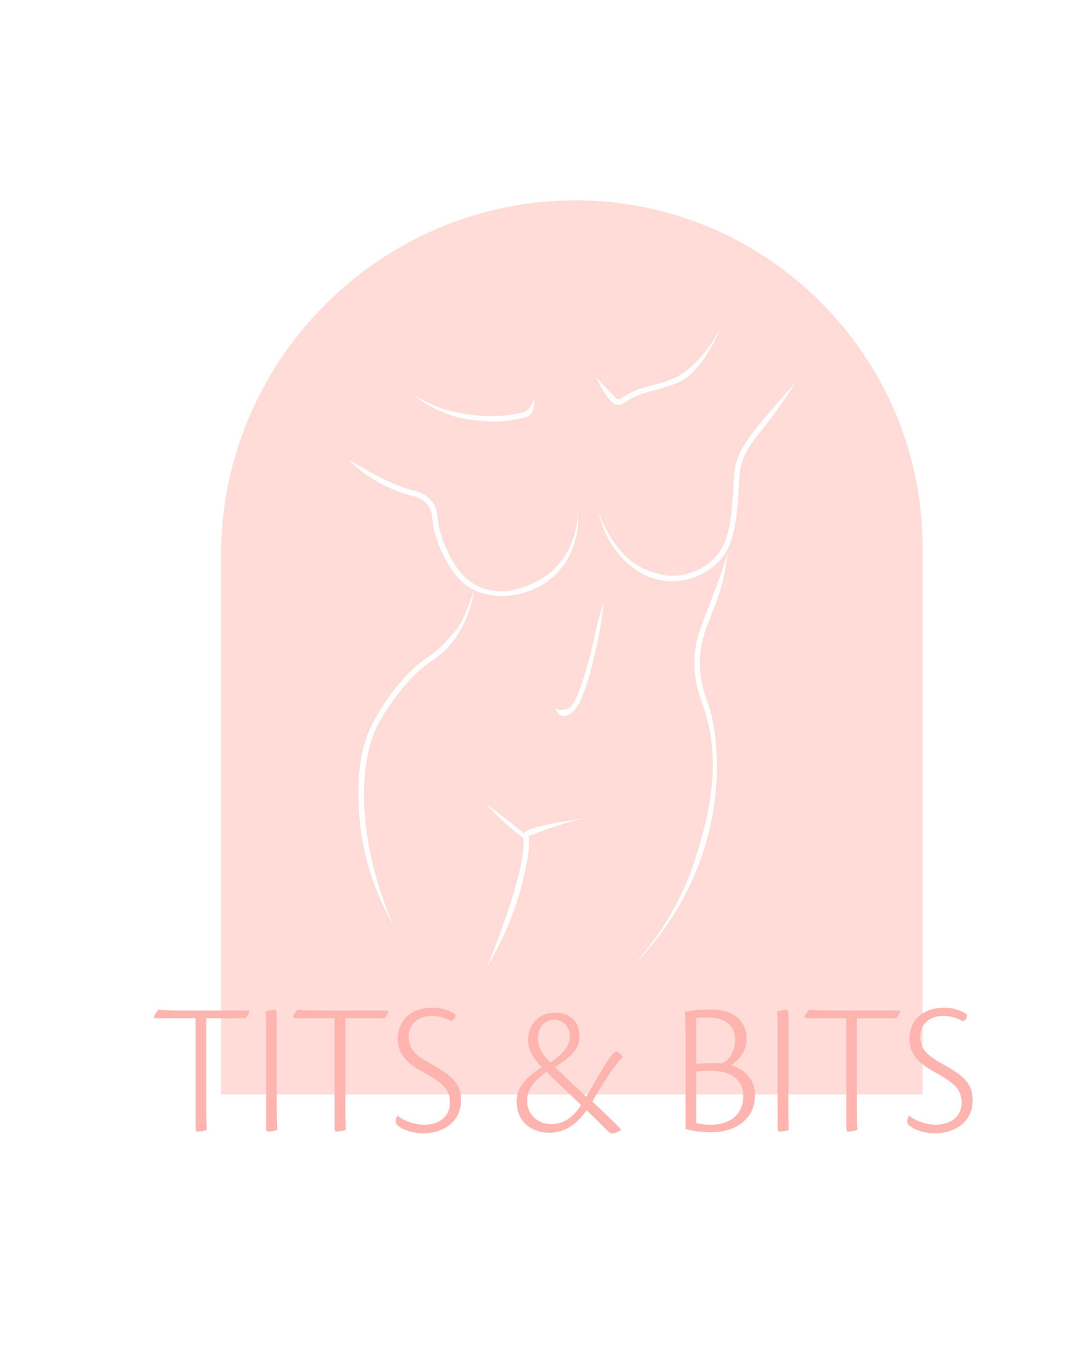 Titsandbits_x – Learn More about the Business